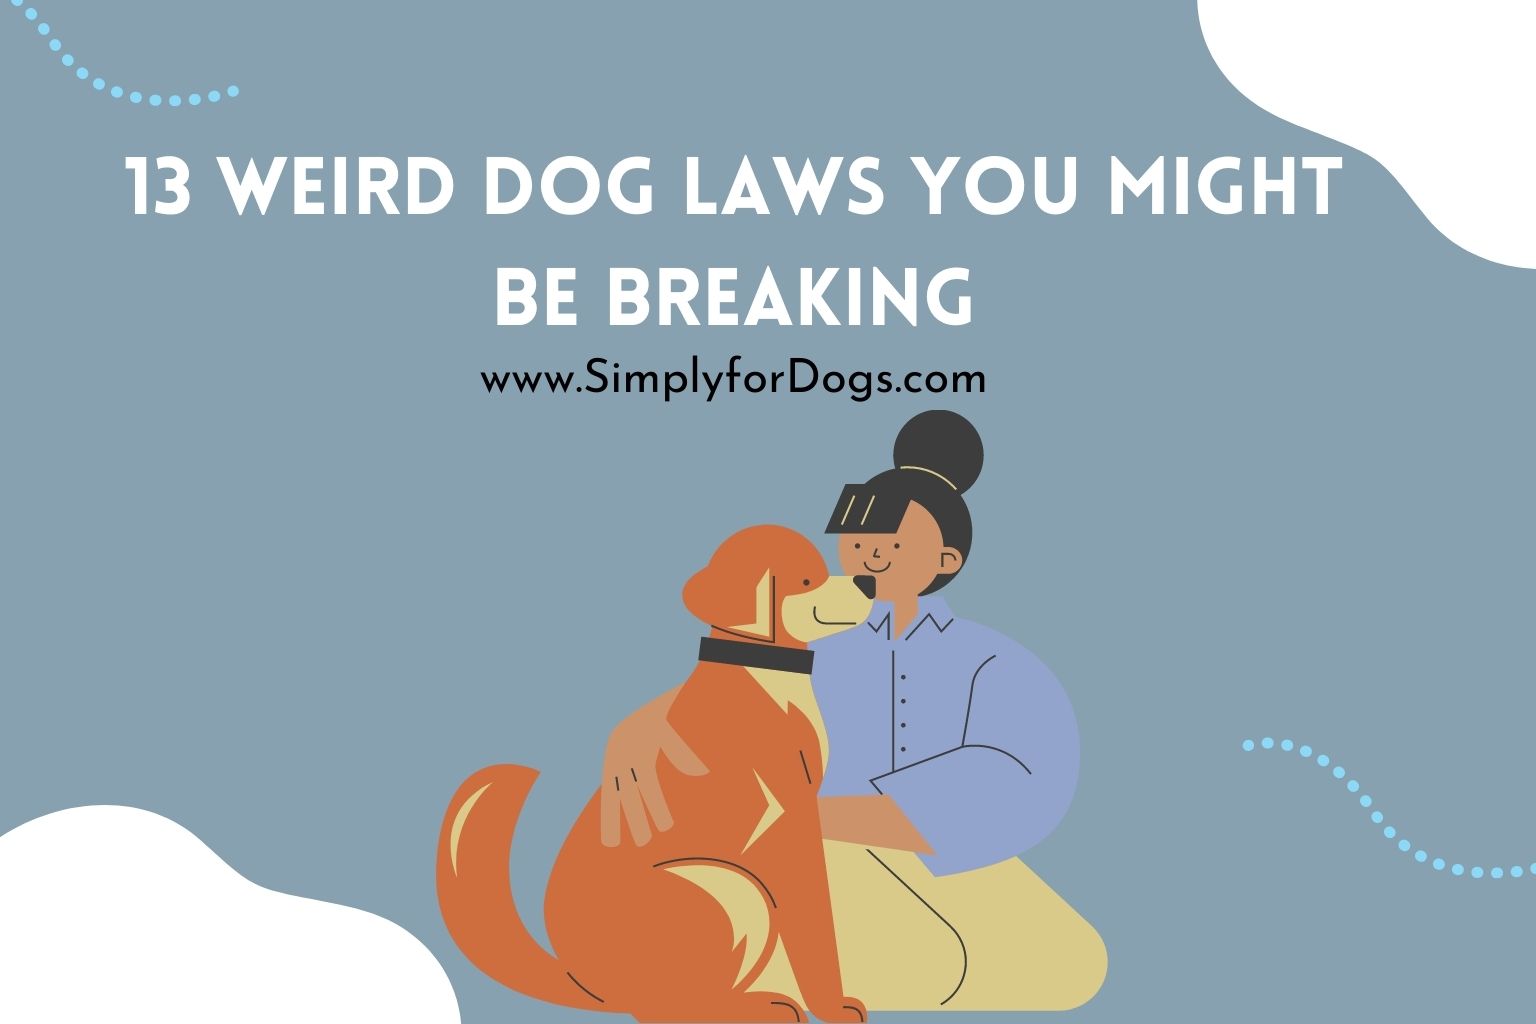 13 Weird Dog Laws You Might Be Breaking